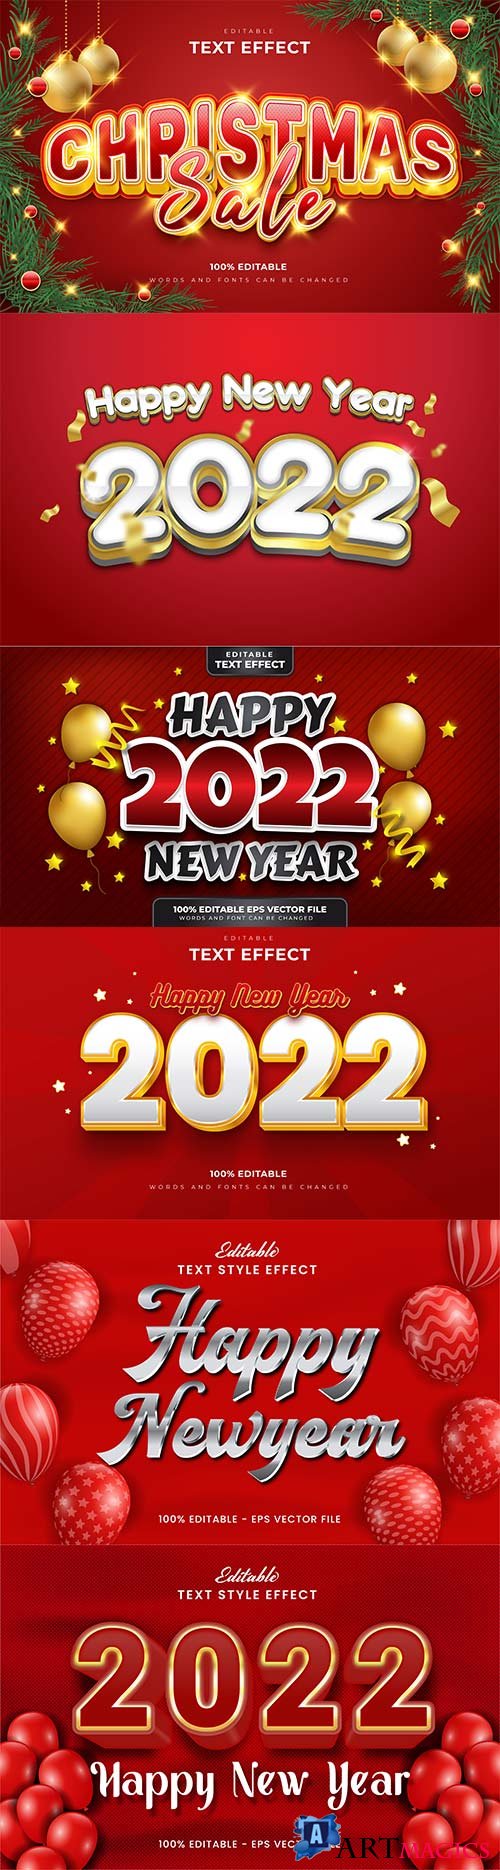 Merry christmas and happy new year 2022 editable vector text effects vol 12